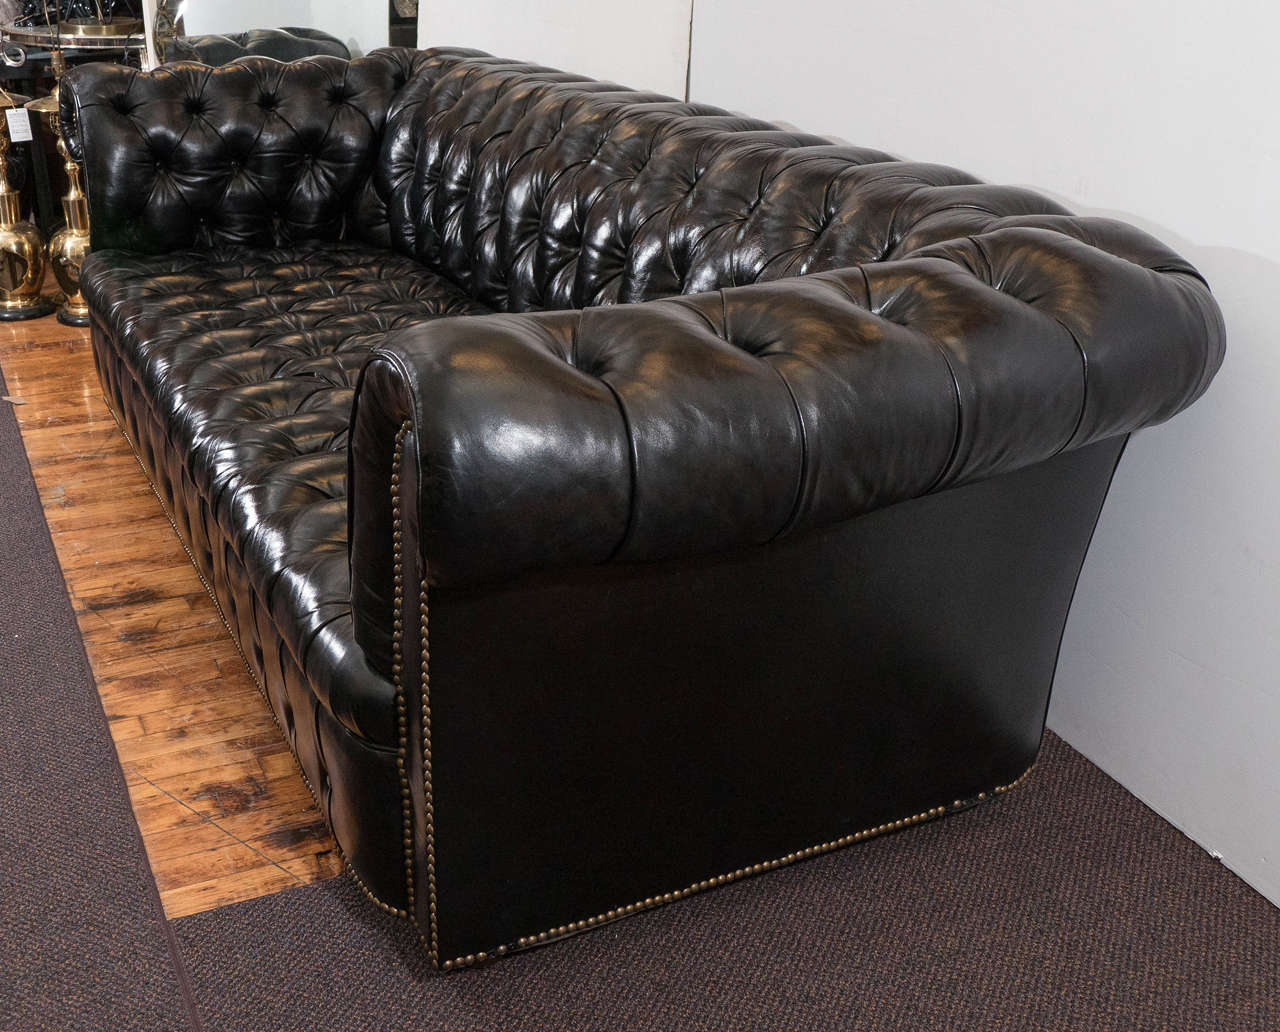 Victorian Midcentury Chesterfield Sofa in Tufted Black Leather